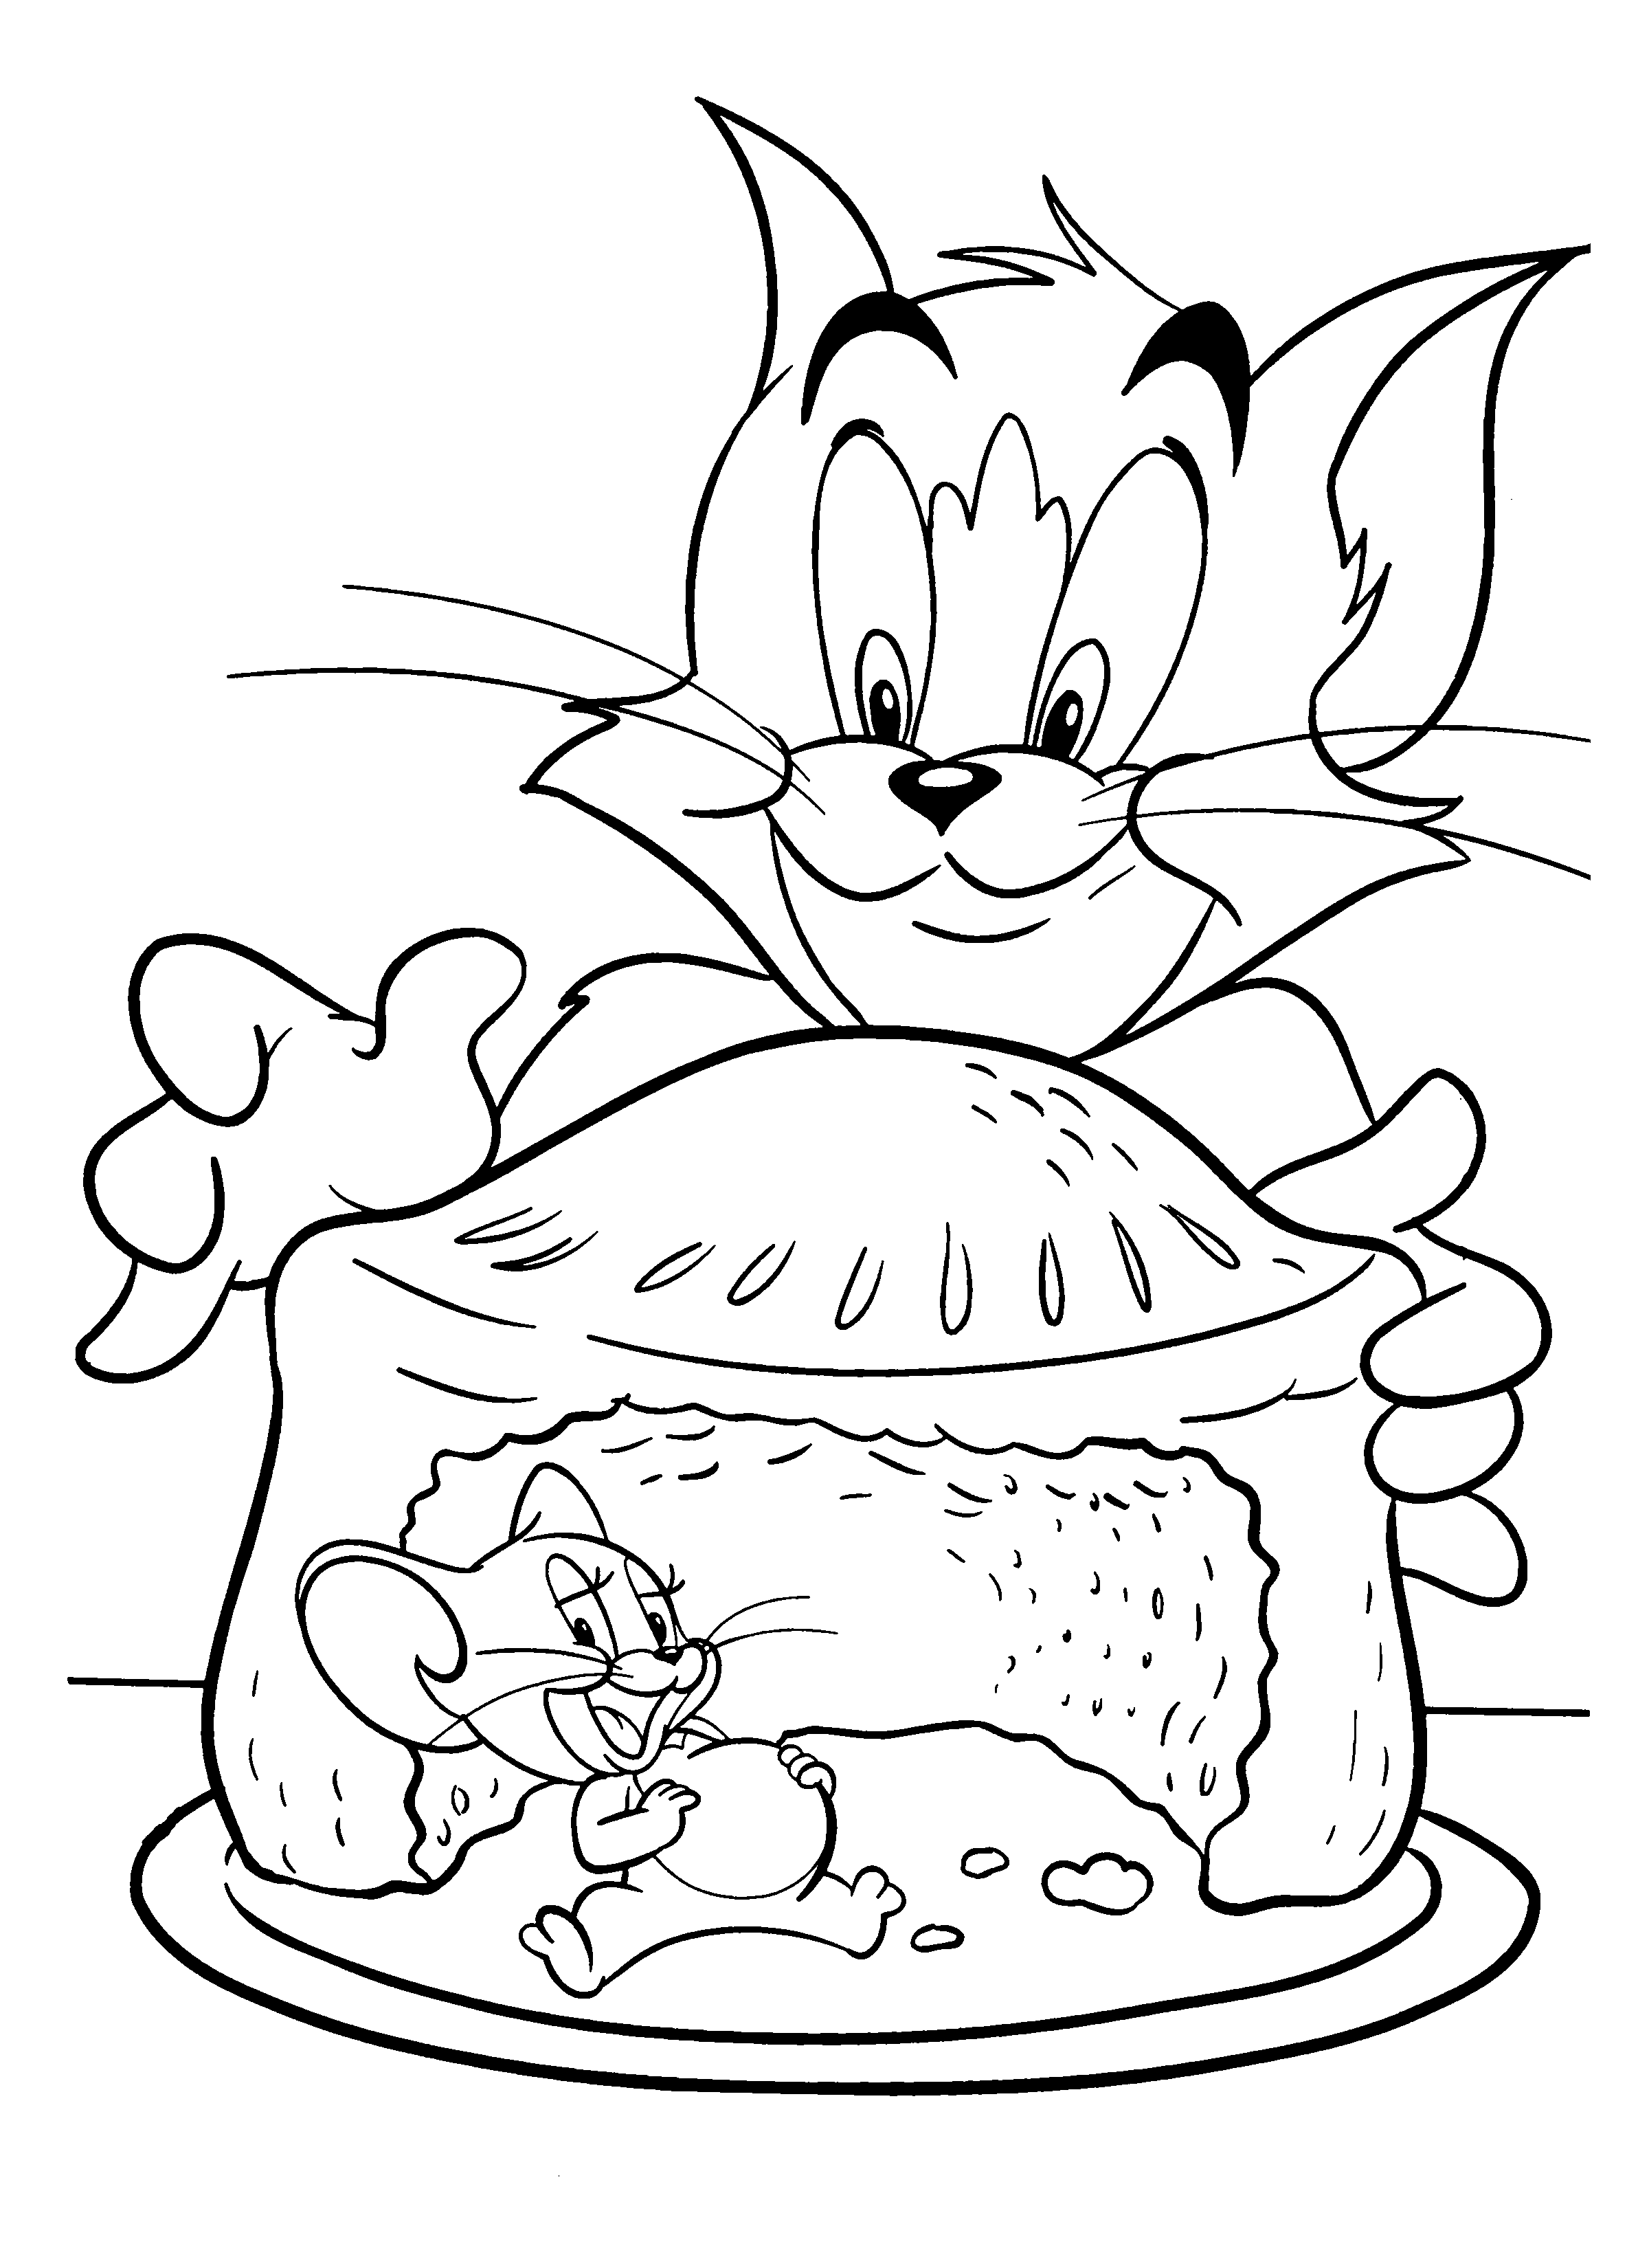 Printable Tom And Jerry Coloring Pages - Printable Word Searches